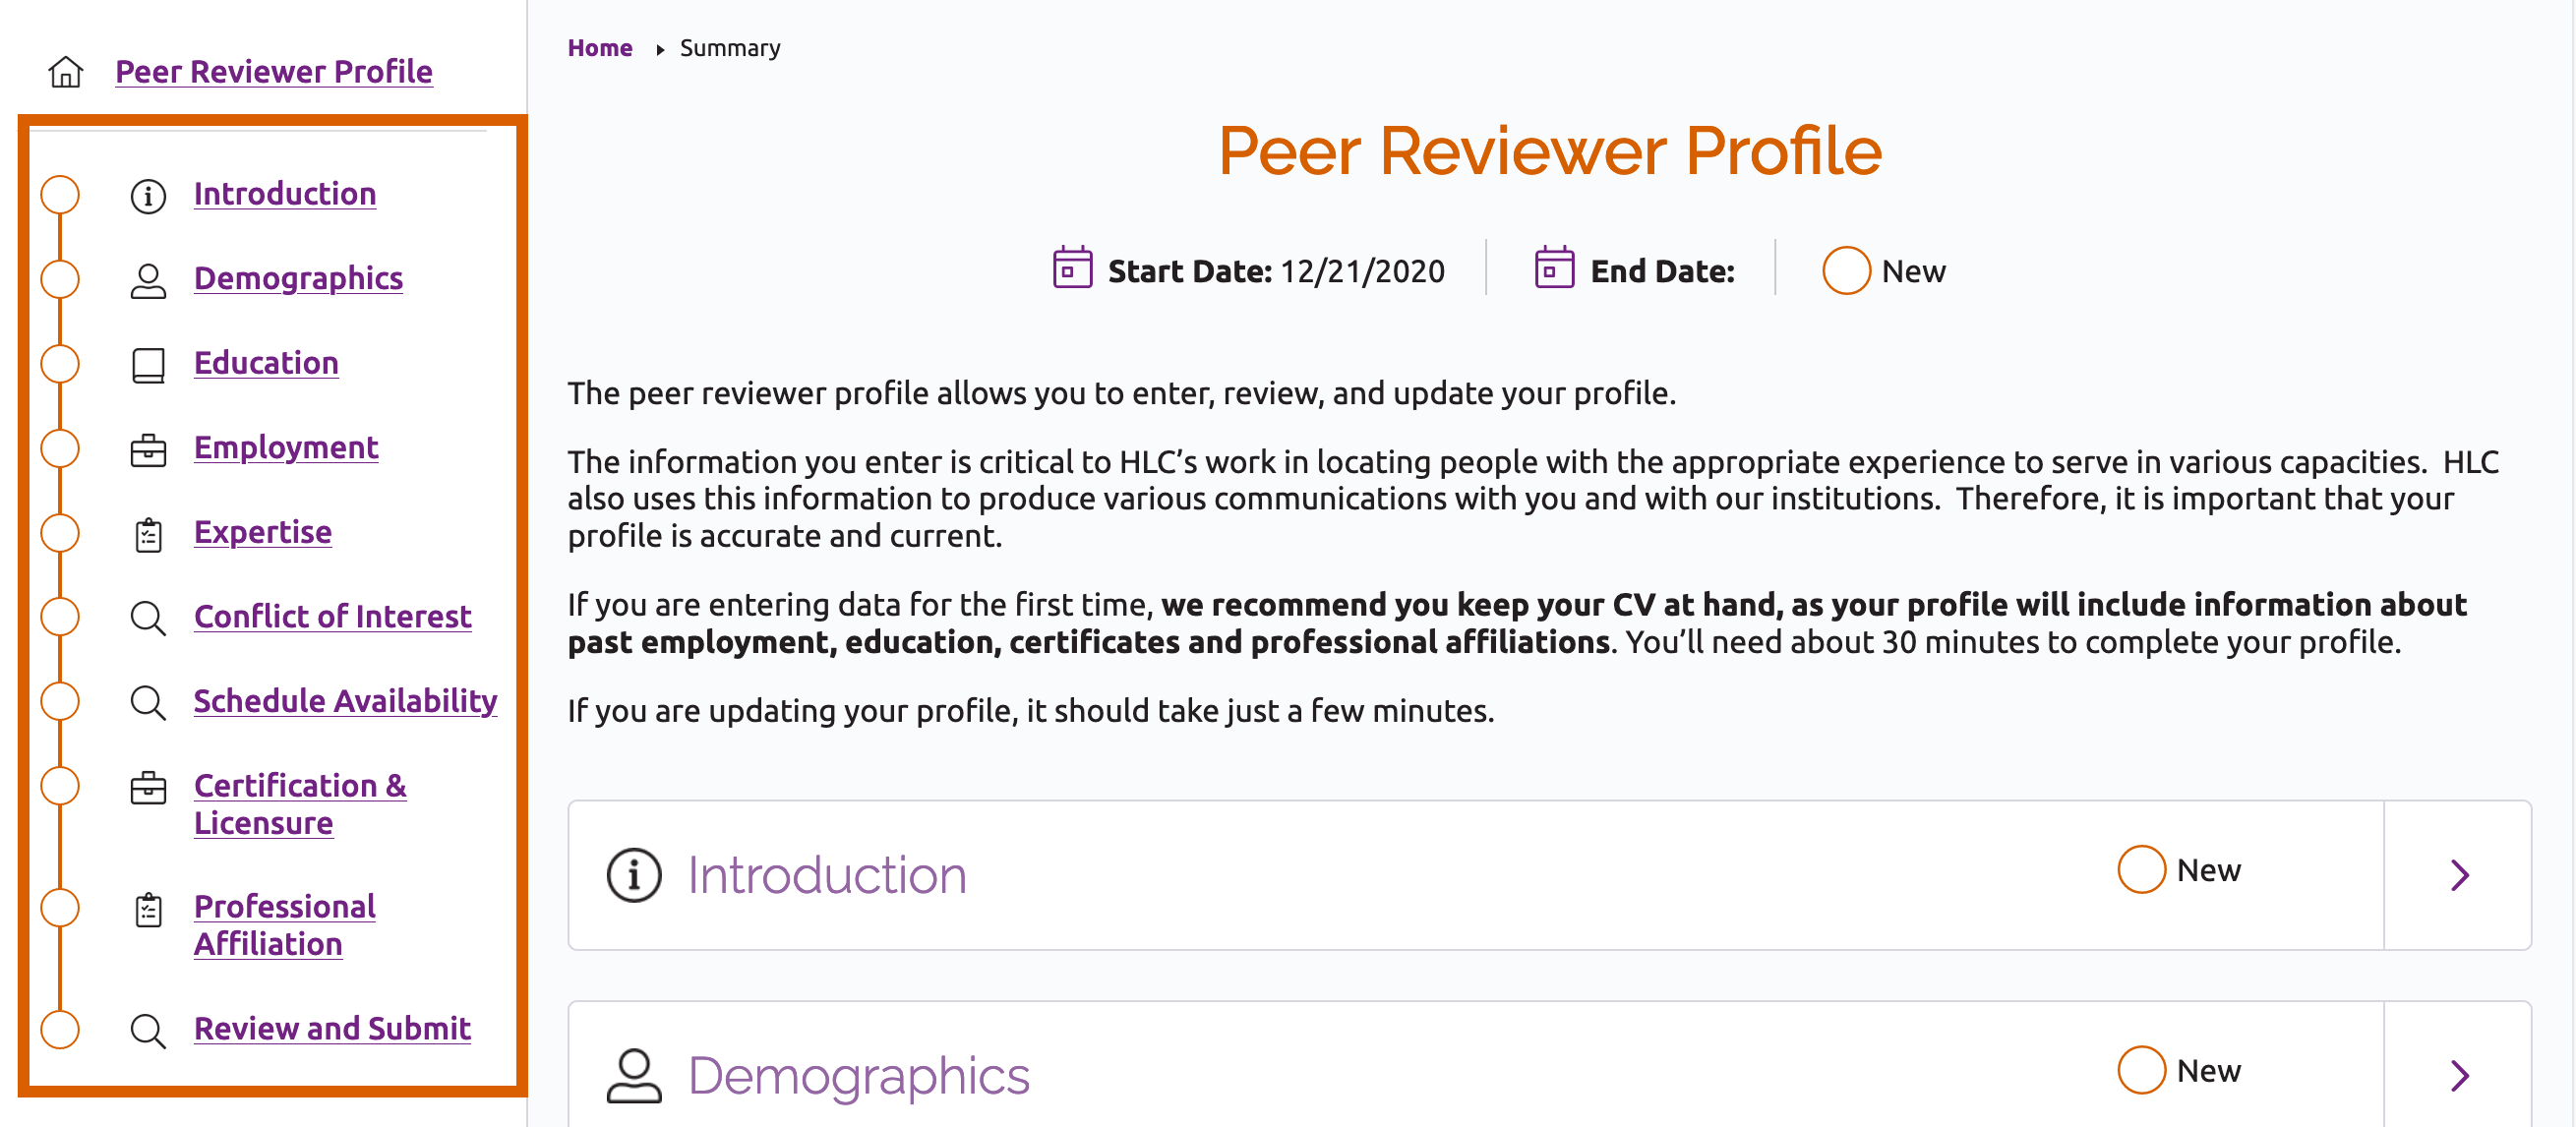 Peer Reviewer Profile home screen showing menu sections marked as not started